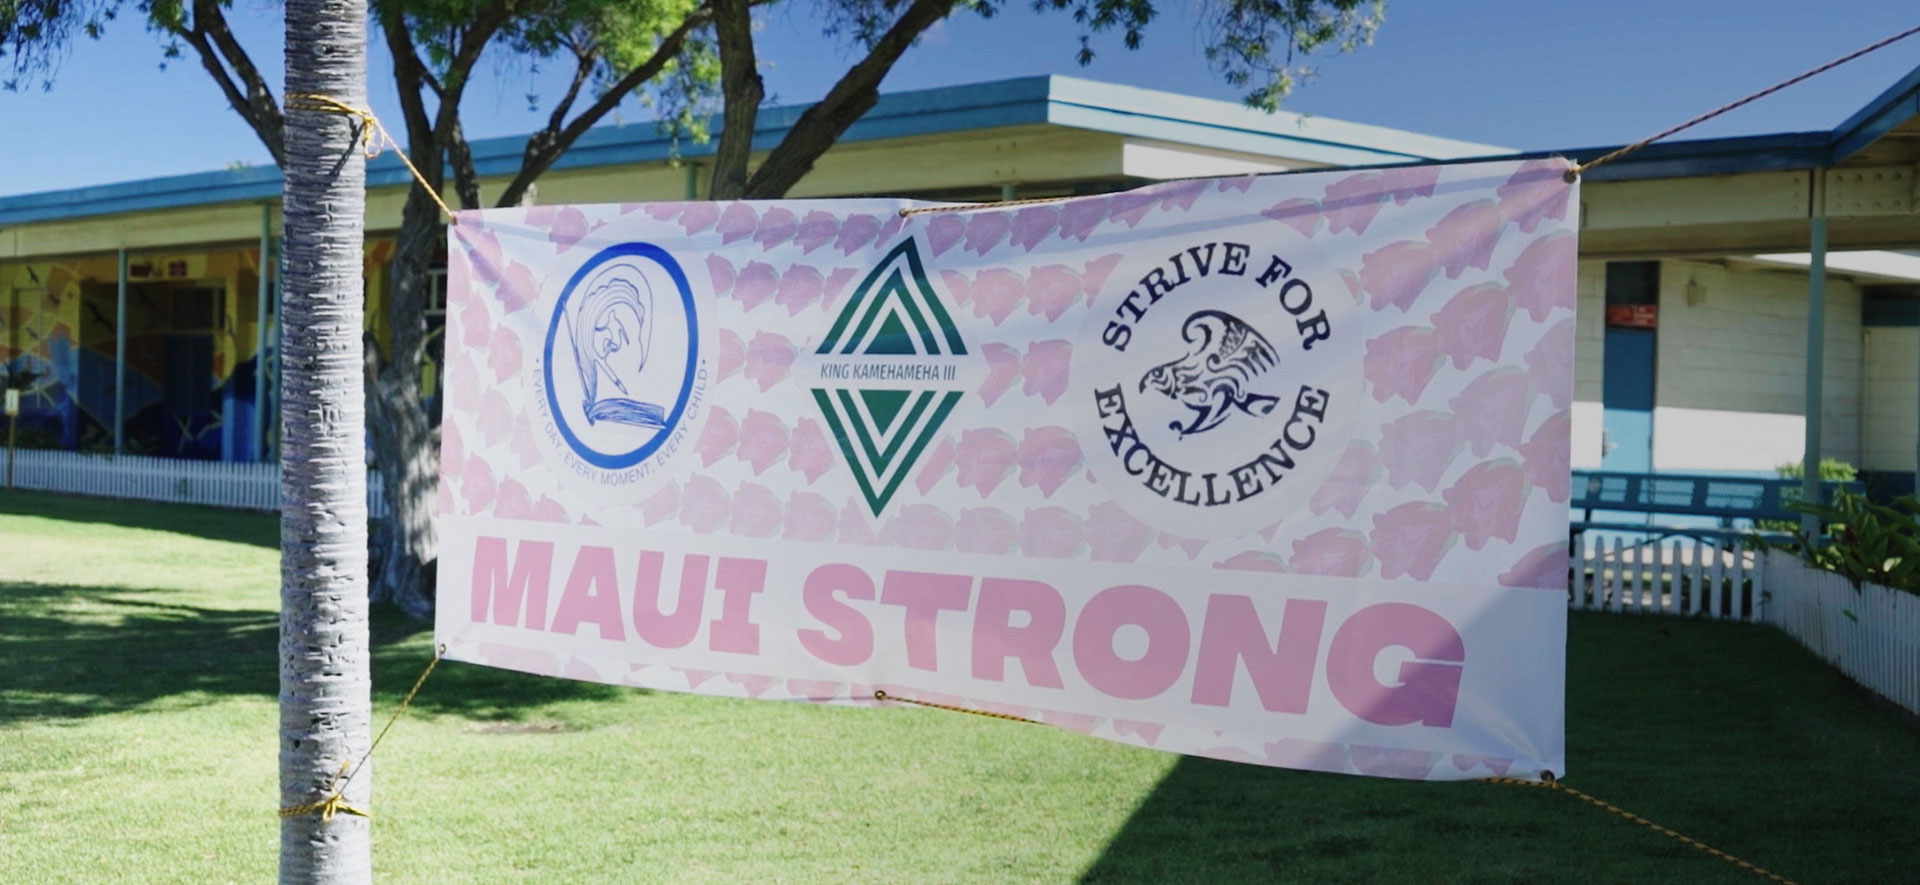 Showing Compassion and Love in Hawaii